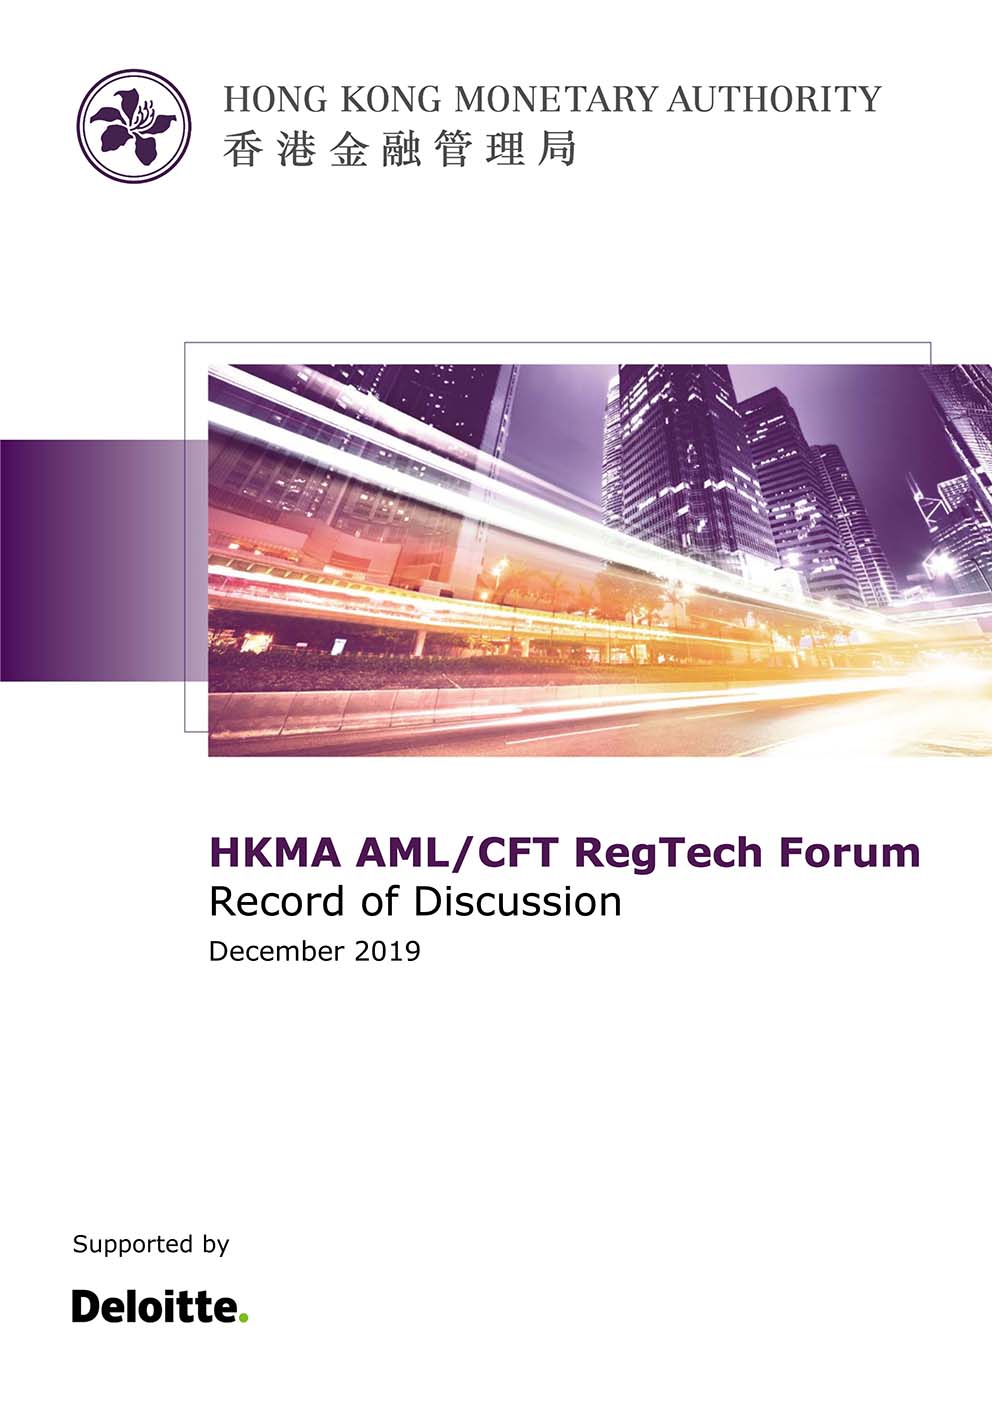 HKMA AML/CFT RegTech Forum Record of Discussion